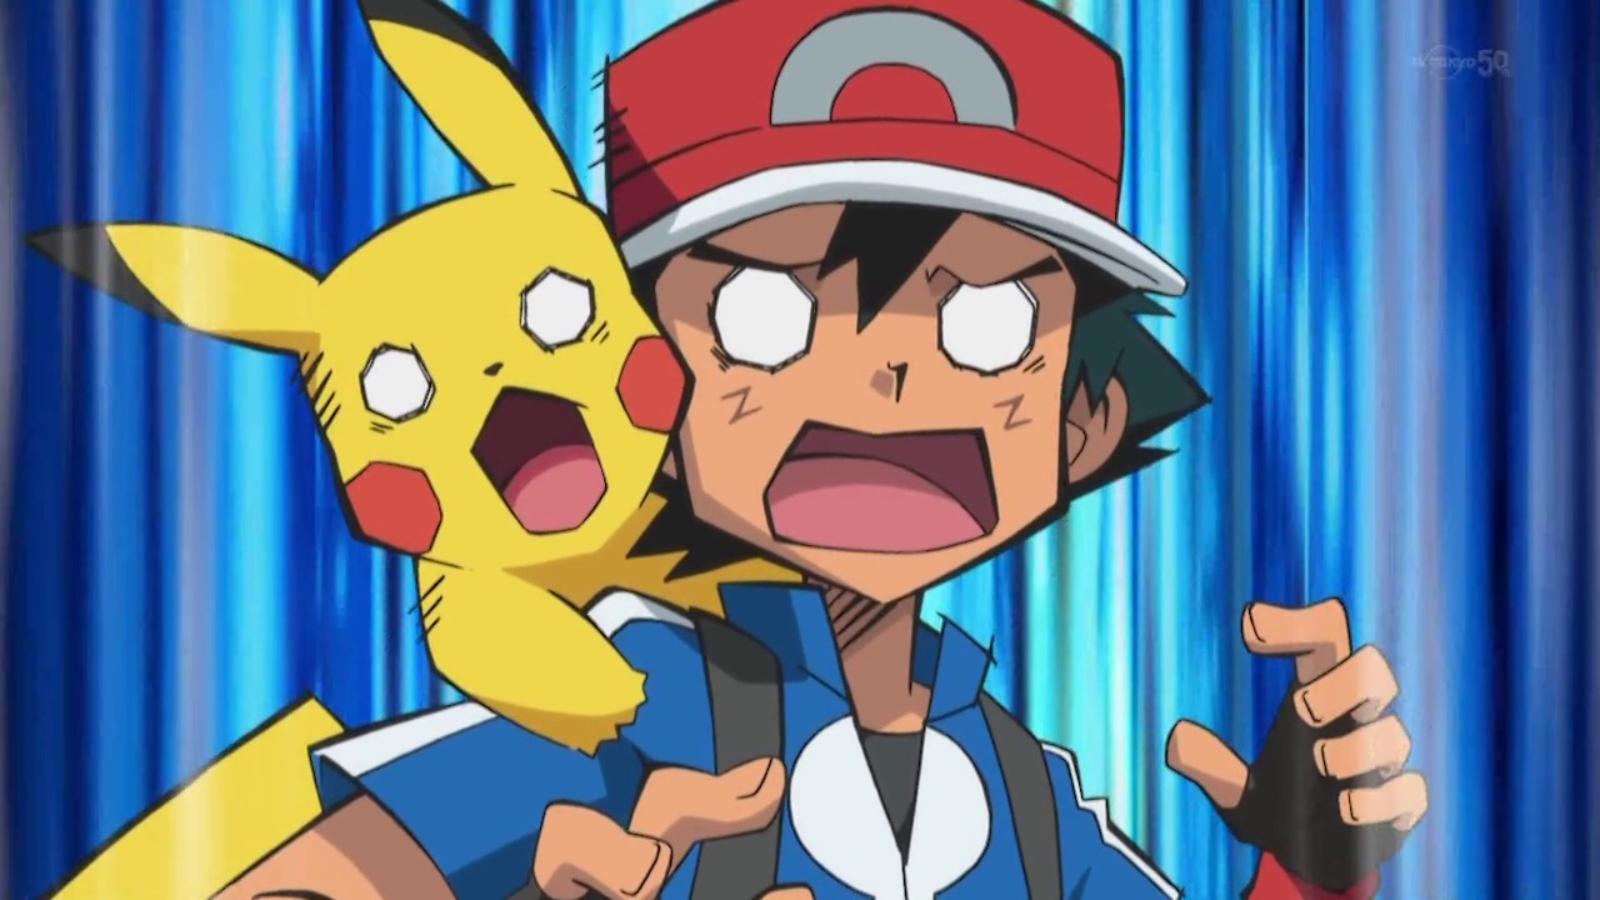 Ash and Pikachu looking shocked